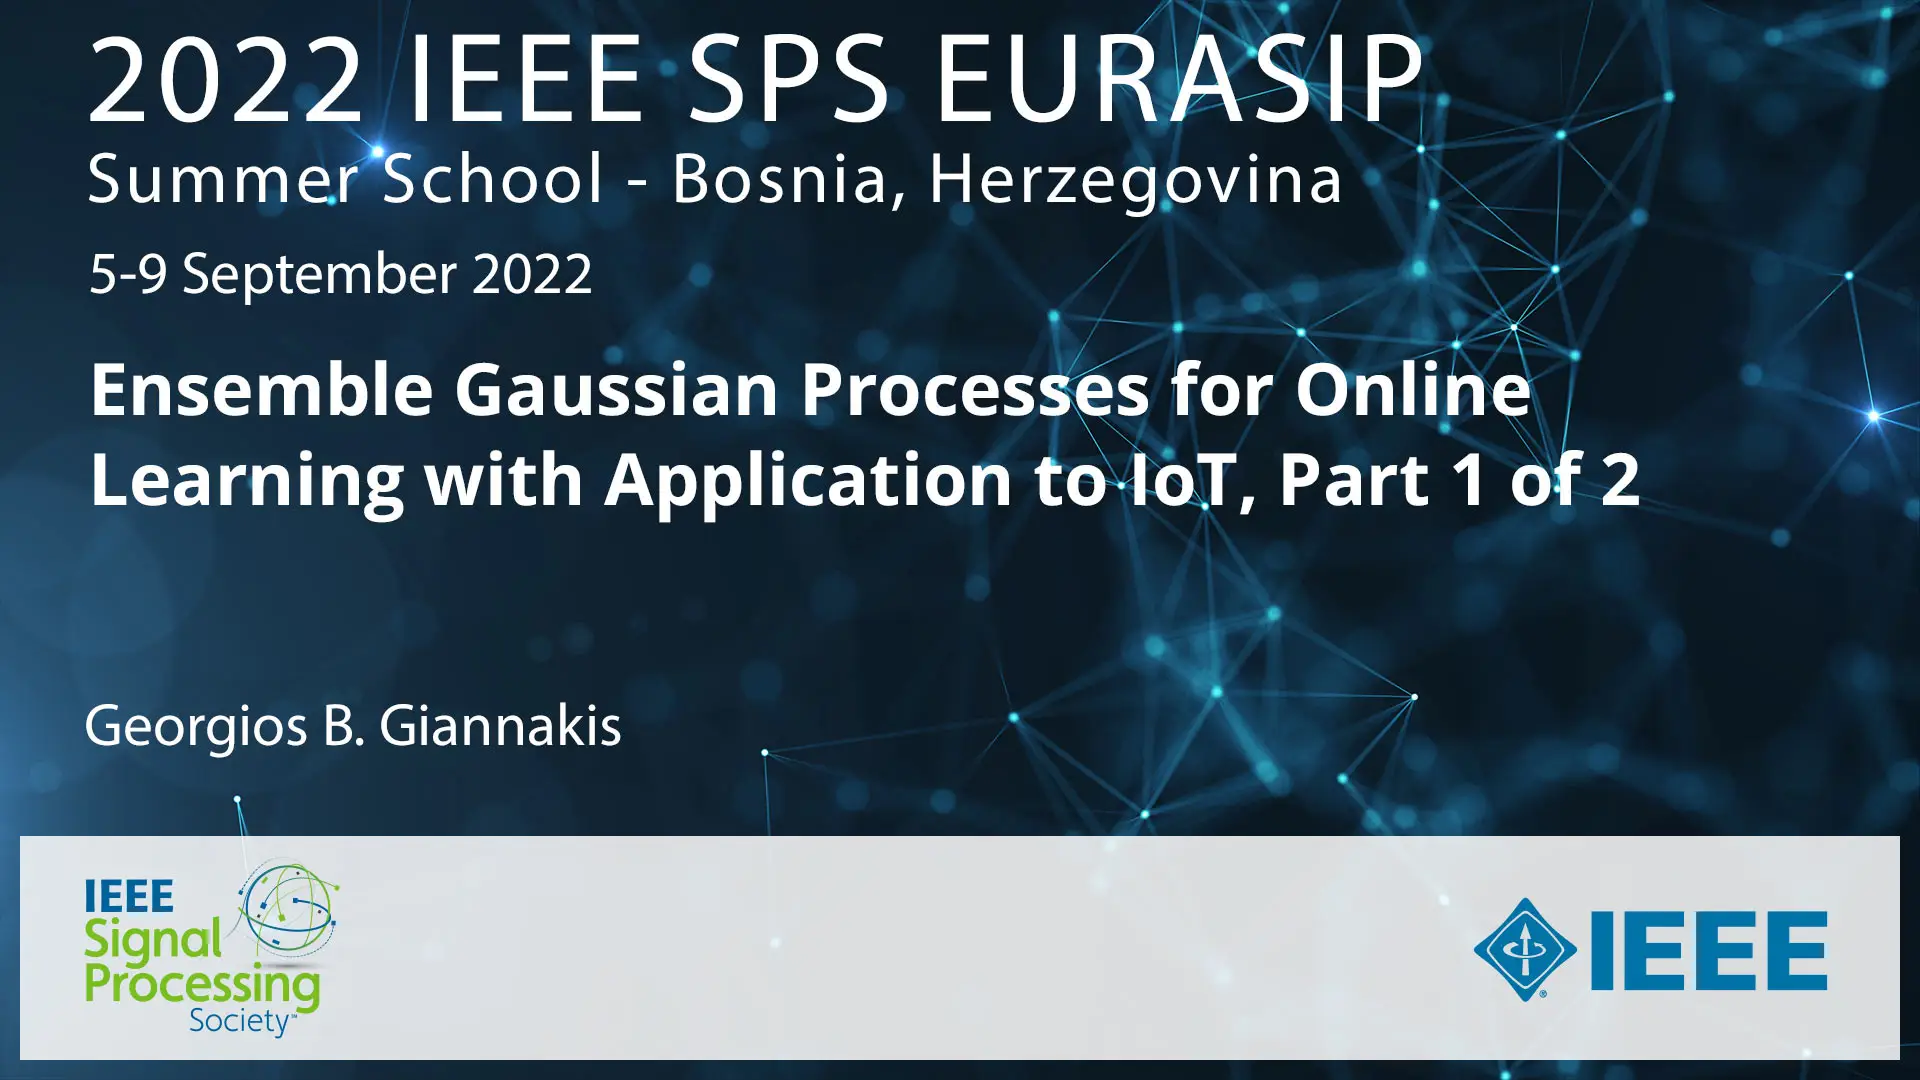 Ensemble Gaussian Processes for Online Learning with Application to IoT, Part 1 of 2